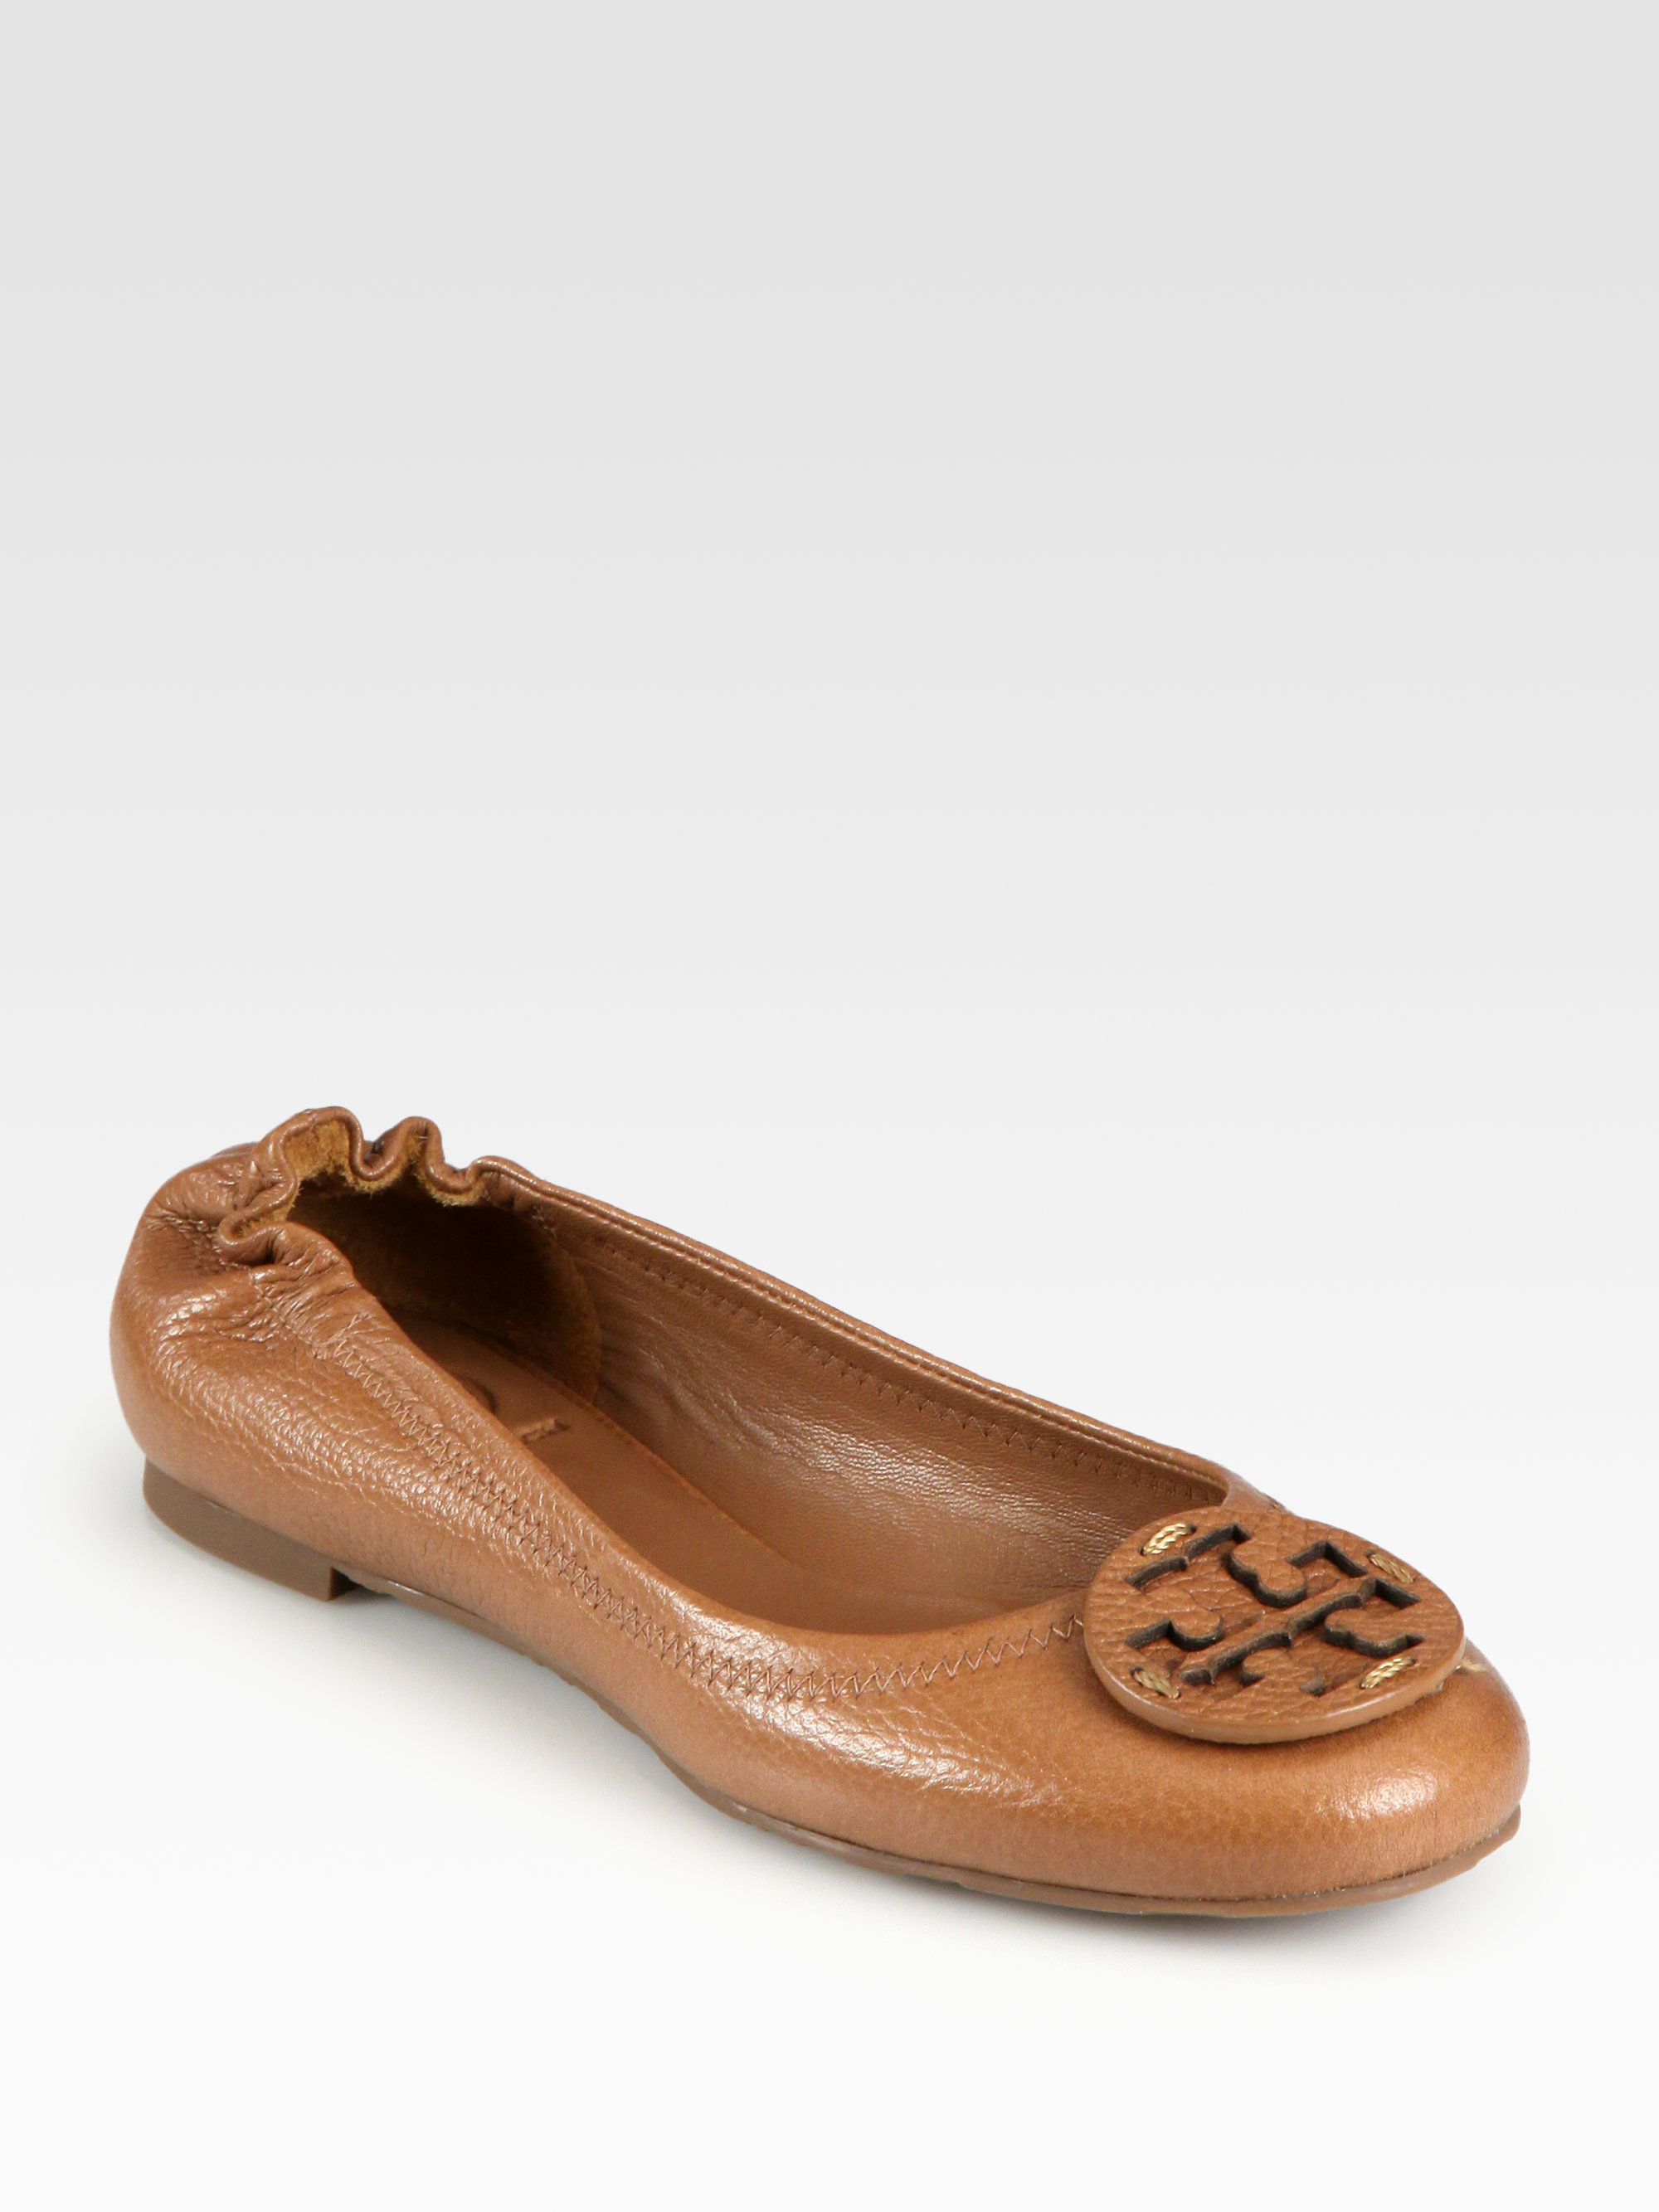 Tory Burch Leather Reva Tumbled Logo Flats in Brown - Lyst